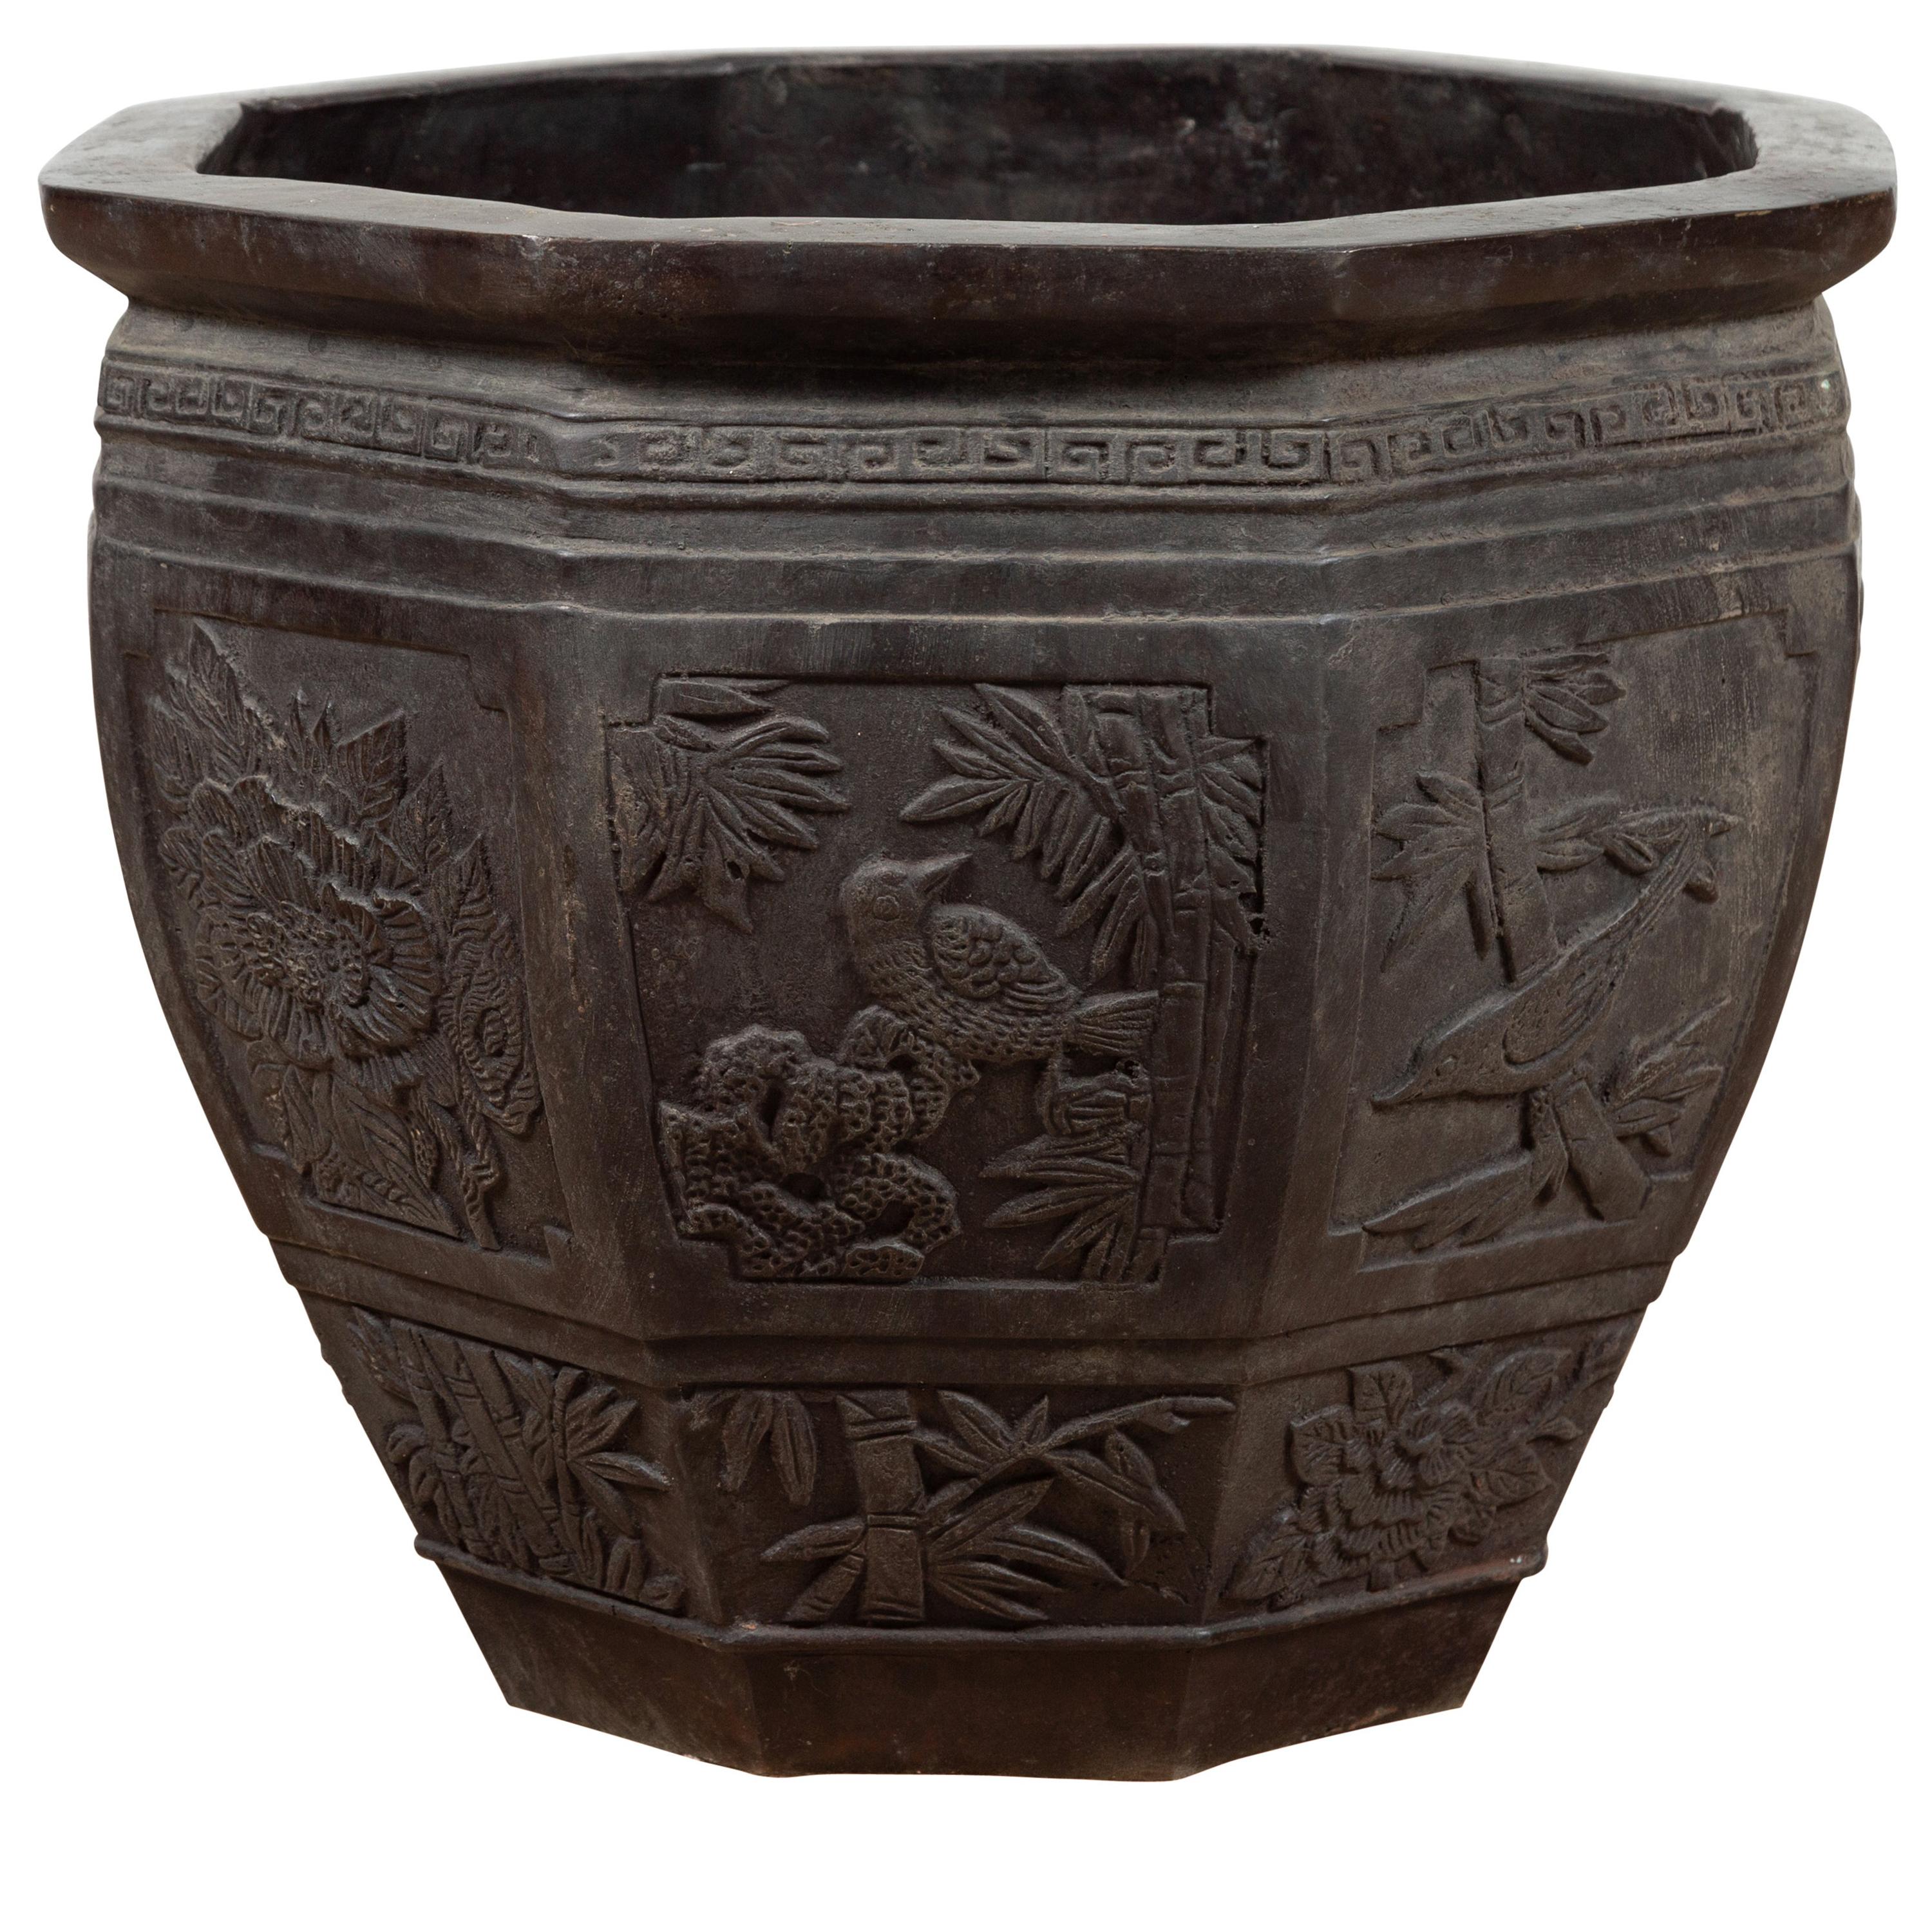 Vintage Asian Octagonal Bronze Planter with Floral, Foliage and Bird Motifs